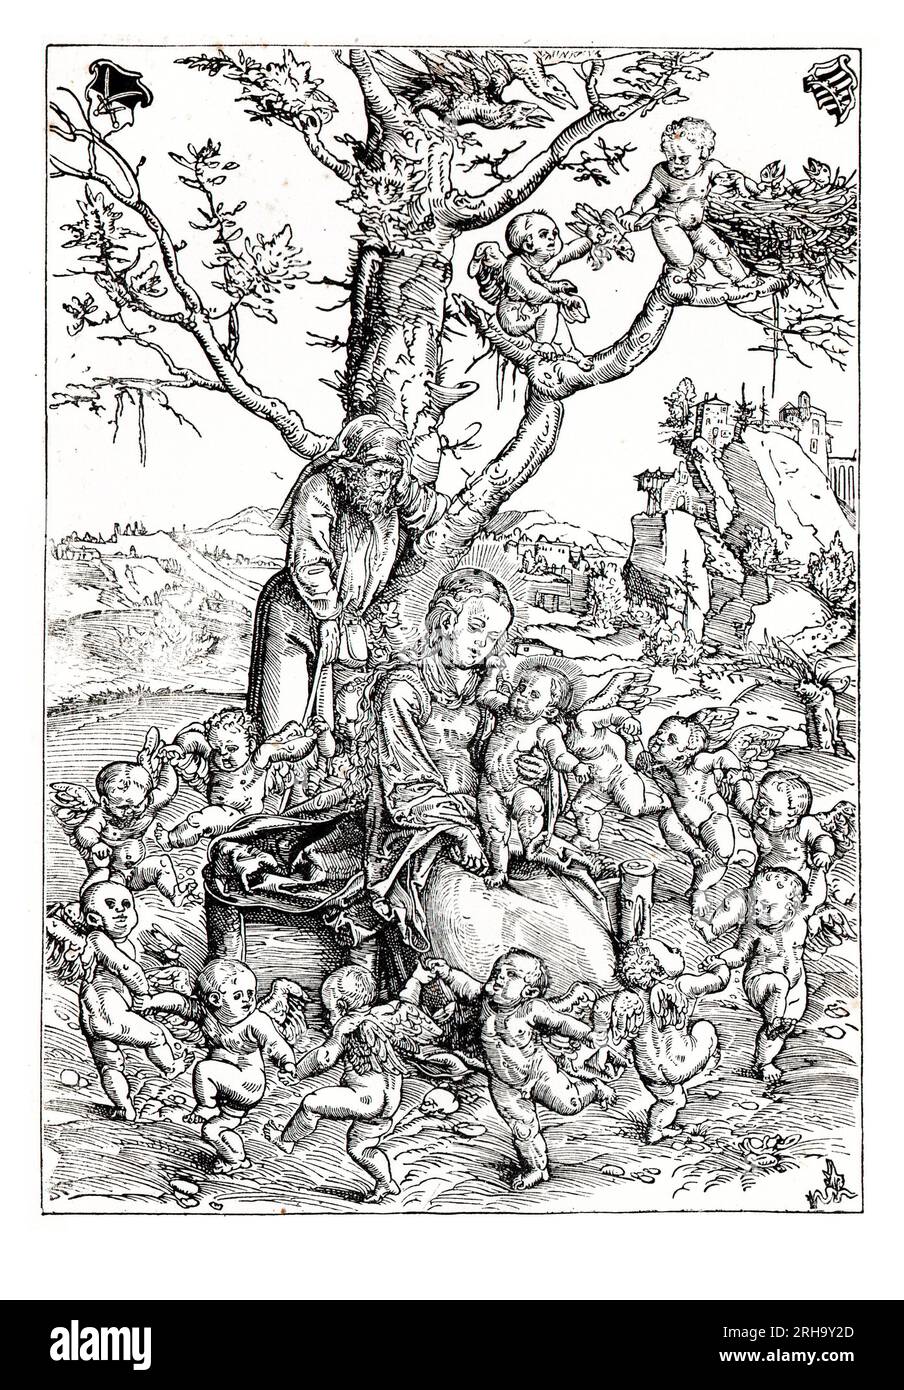 The Repose in Egypt with Dancing Angels. Engraving after Luca Cranach. By the robbery of the nest in the tree, the painter ingeniously points to the Massacre of the Innocents which caused the Flight into Egypt. From Lives of the Saints by Sabin Baring-Gould. Stock Photo